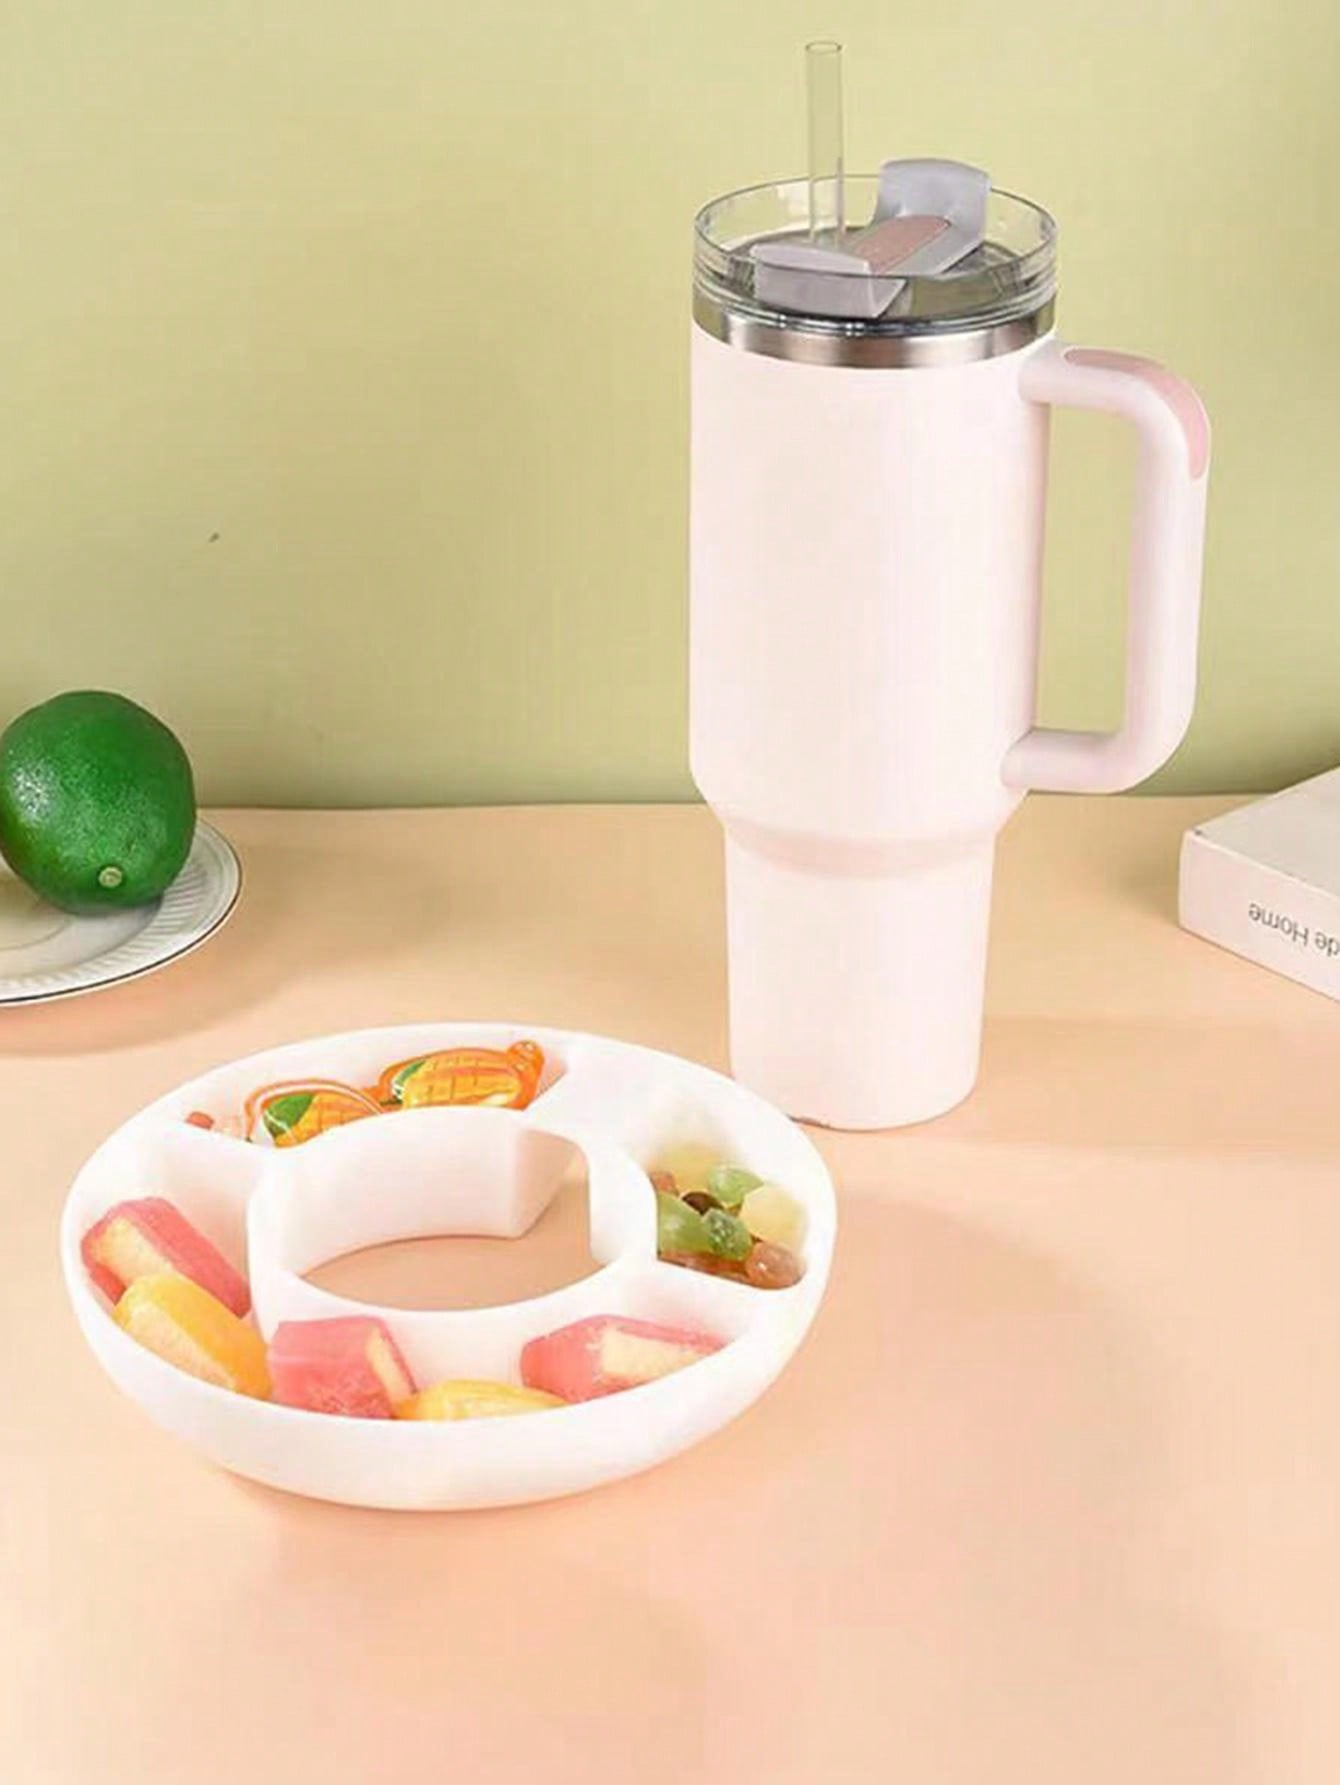 1pc Cup Holder Snack Tray, Easy To Assemble, Suitable For Reusable Snack Containers In The Accessories, With 3 Compartments, Compatible With Flat Cup Holders